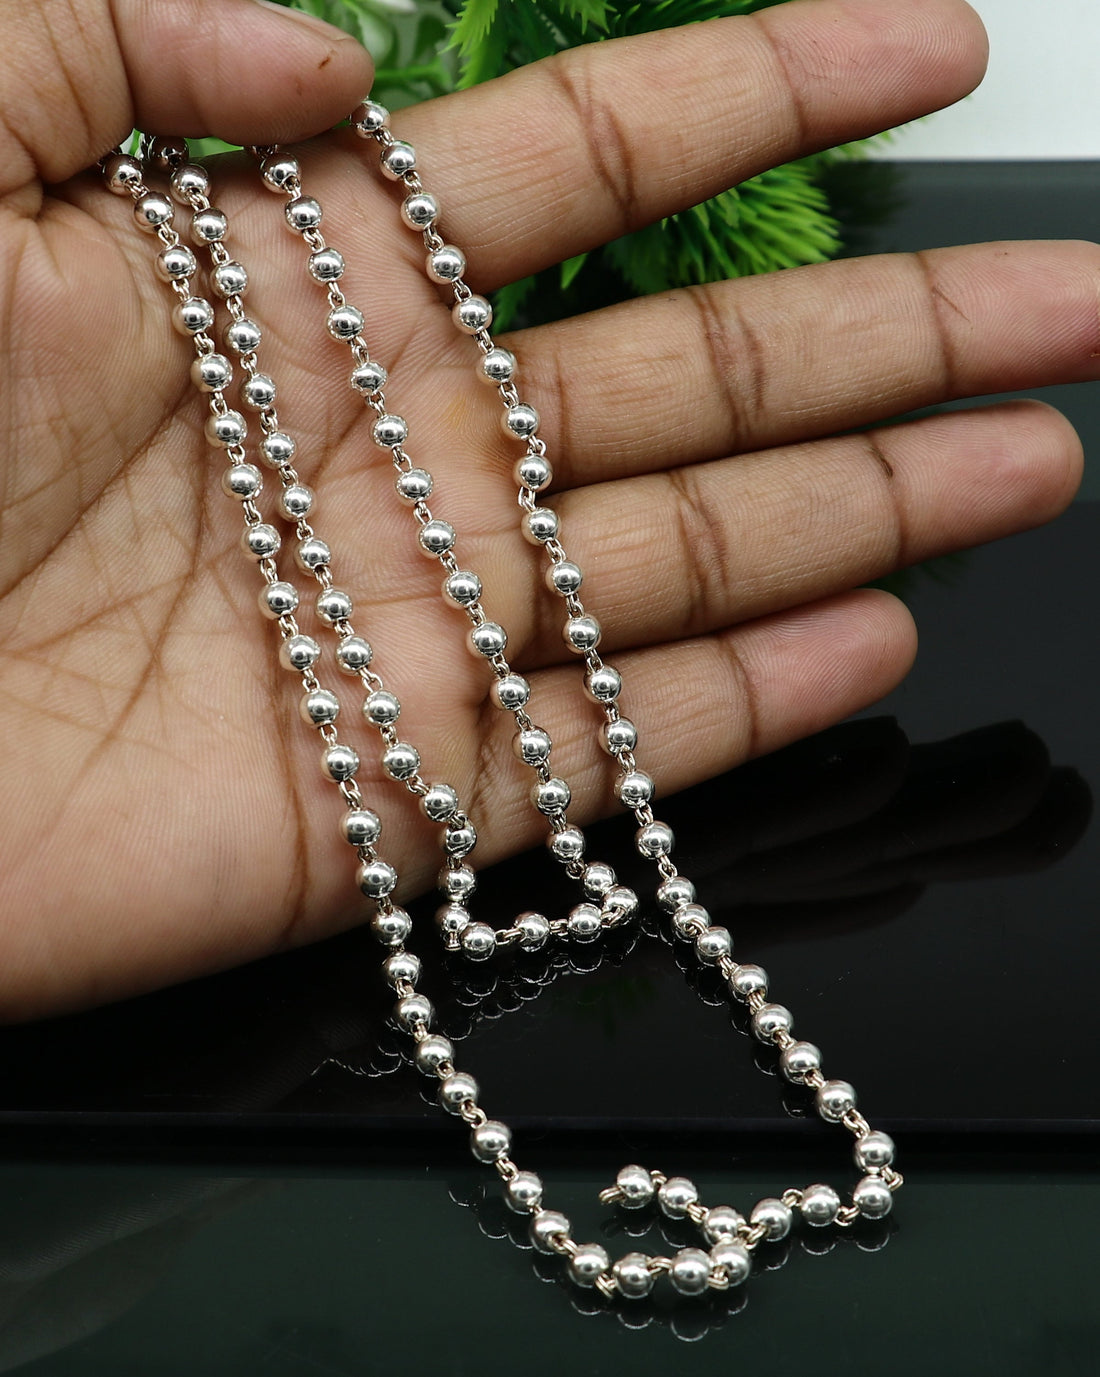 925 sterling silver stunning plain solid beads chain japp mala 108 beads japp chain 26 inches long unisex necklace stylish jewelry ch111 - TRIBAL ORNAMENTS